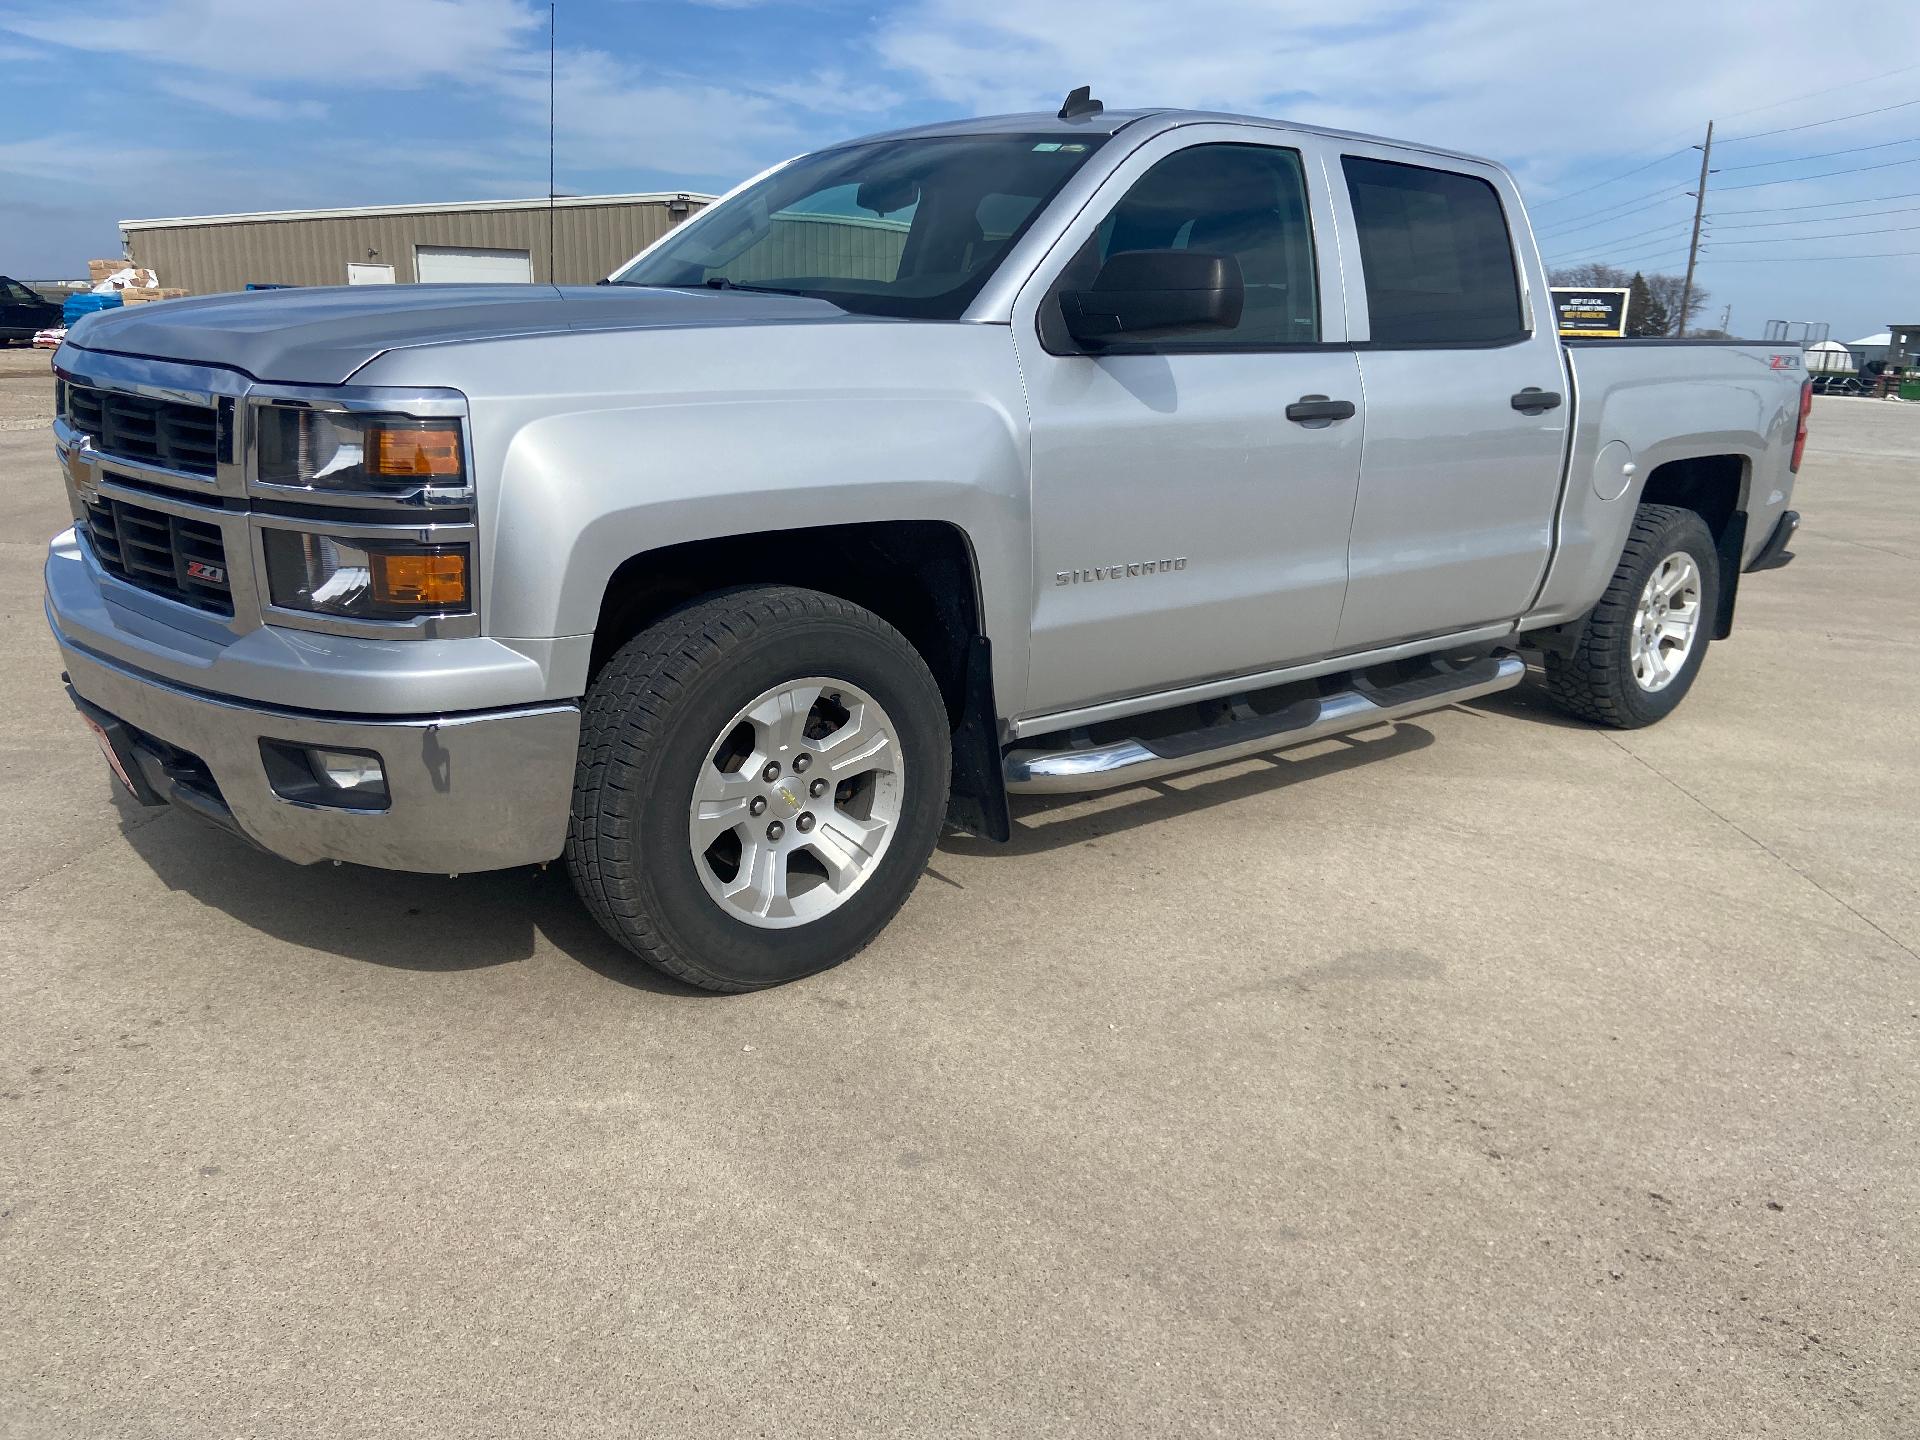 Used 2014 Chevrolet Silverado 1500 LT with VIN 3GCUKREC8EG441087 for sale in Sac City, IA